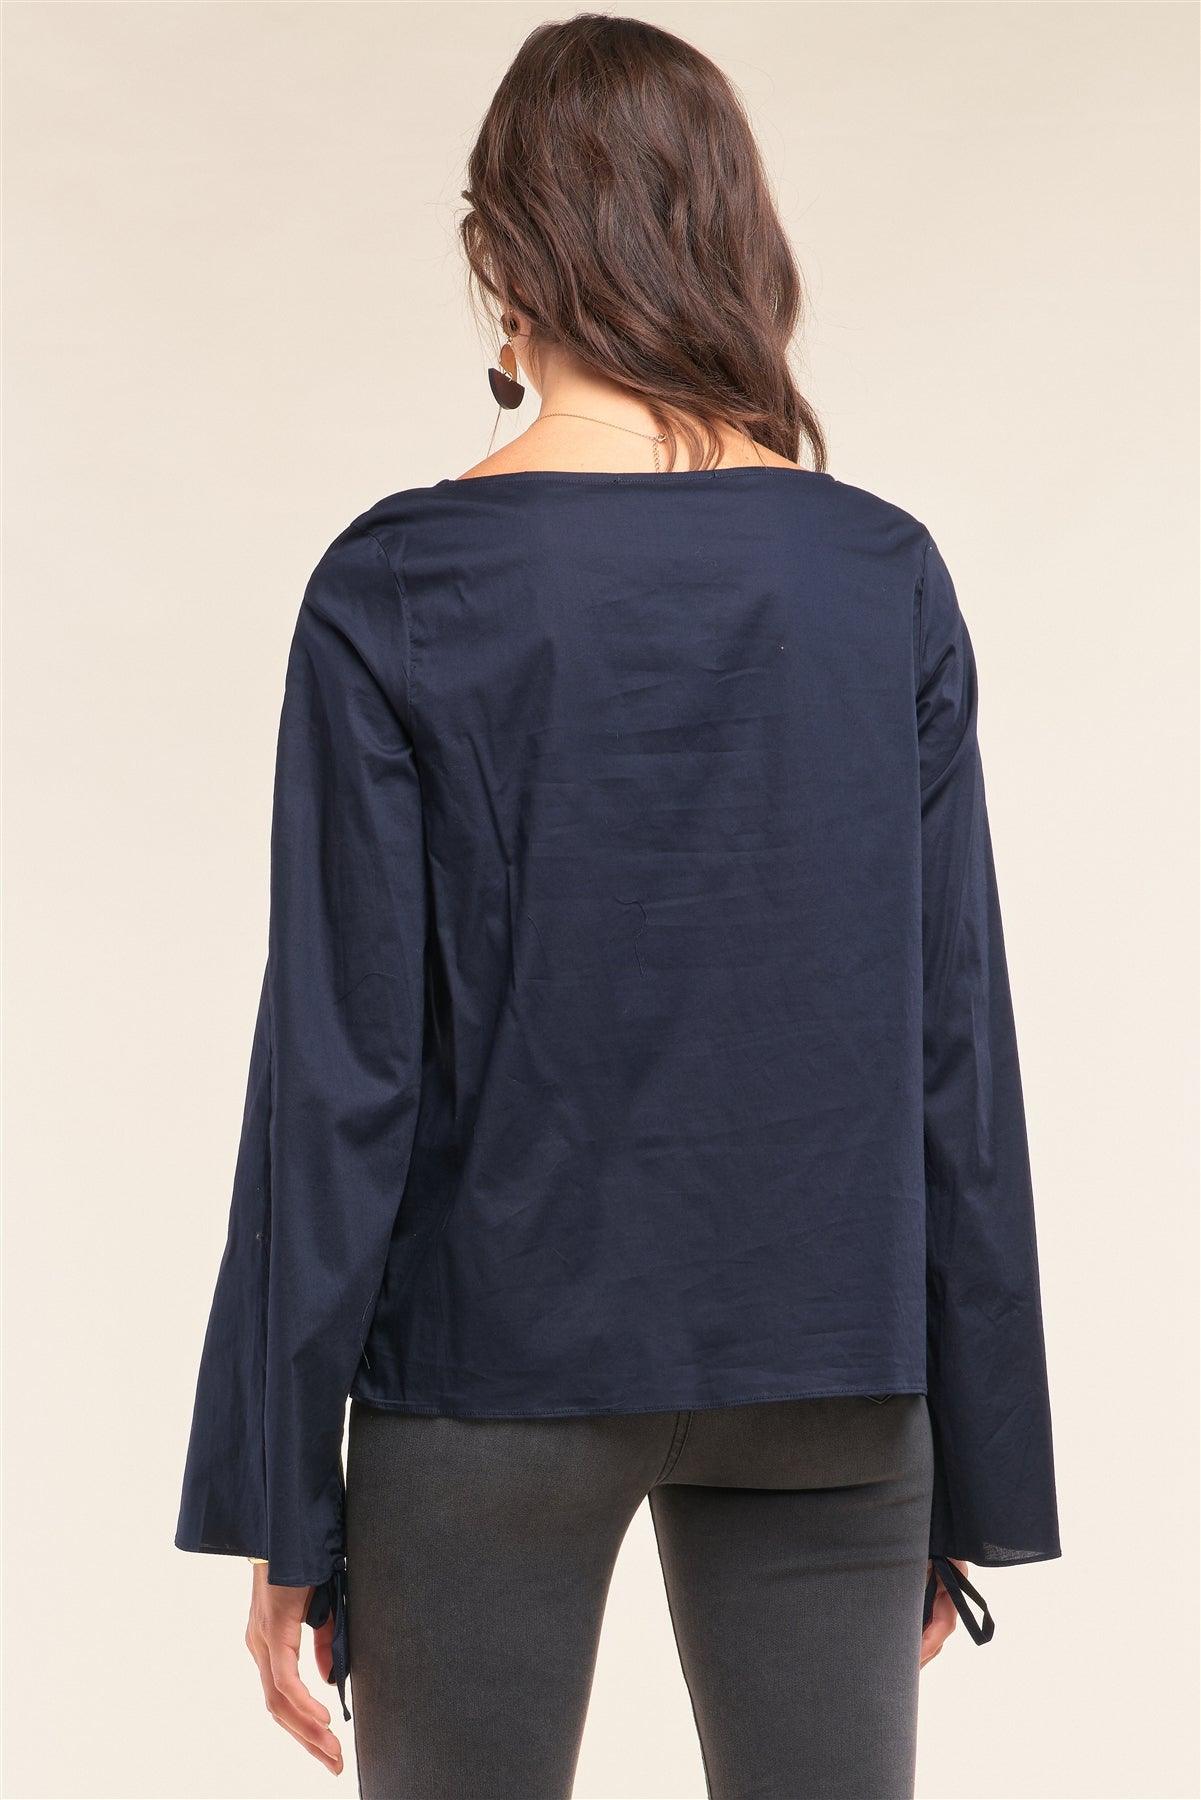 Dark Blue Bateau Neck Relaxed Fit Draw String Gathering Flare Sleeve Detail Top /2-2-1